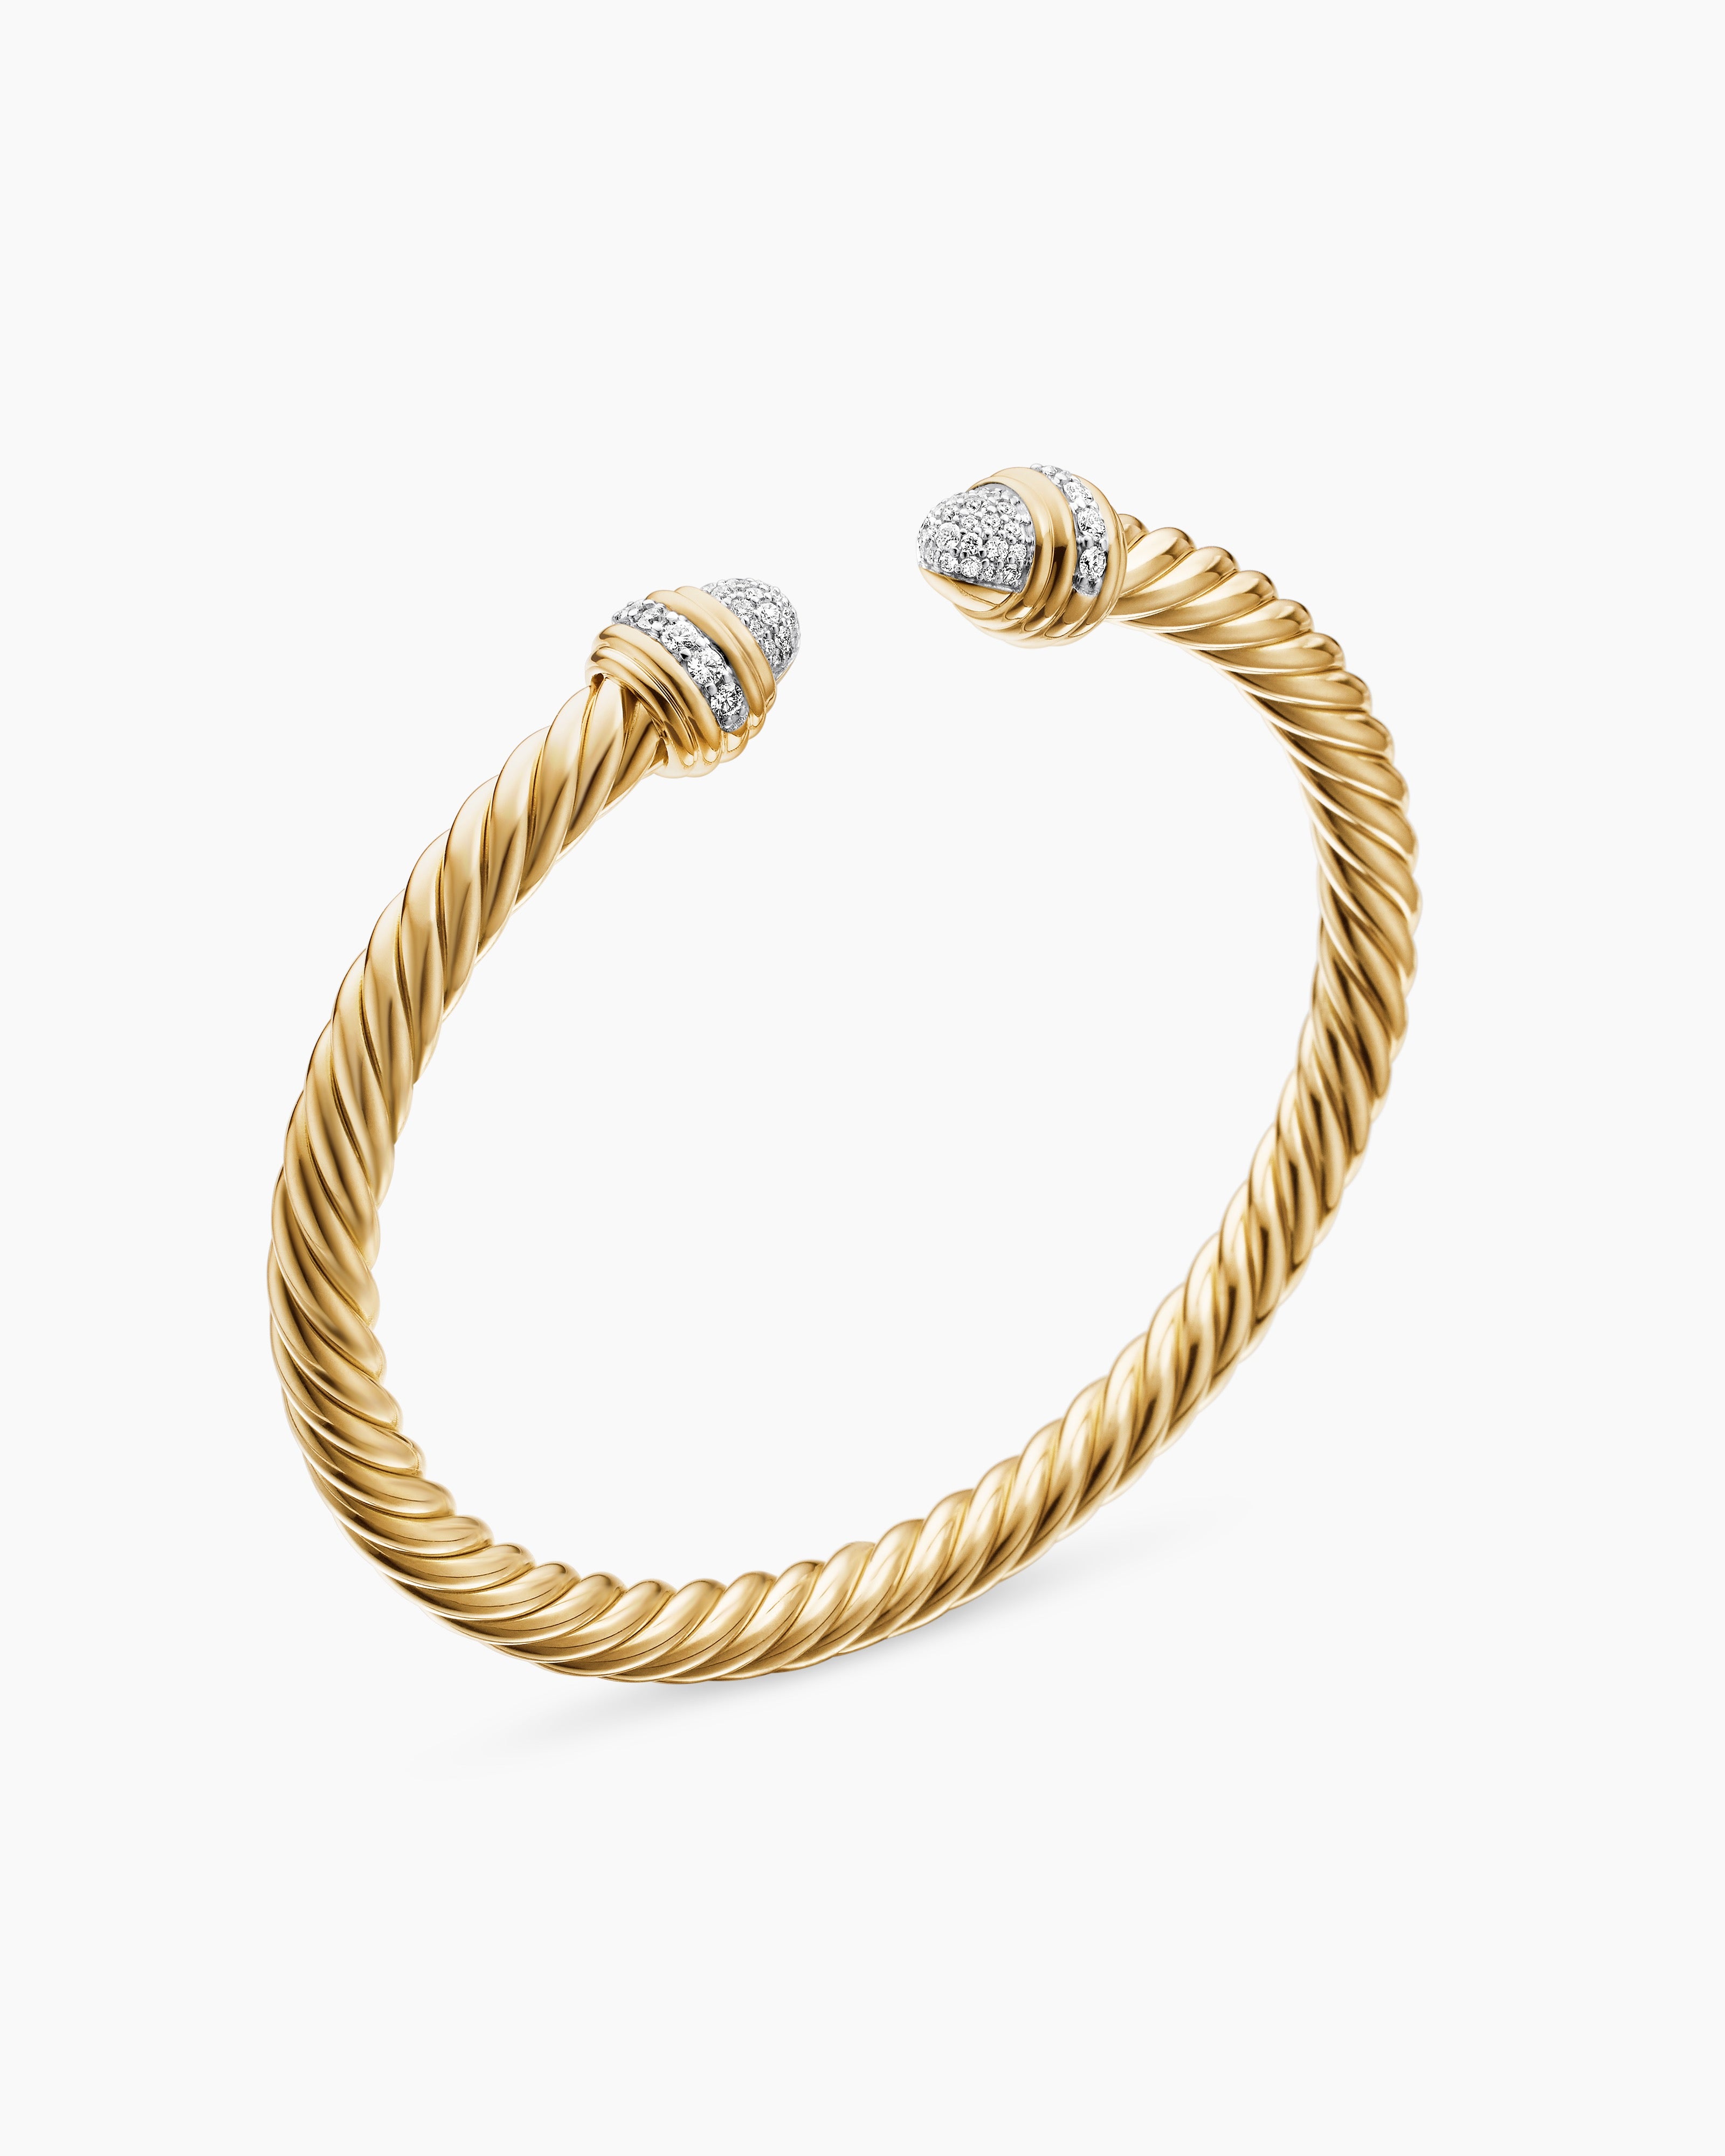 Classic Cablespira Bracelet in 18K Yellow Gold with Diamonds, 5mm